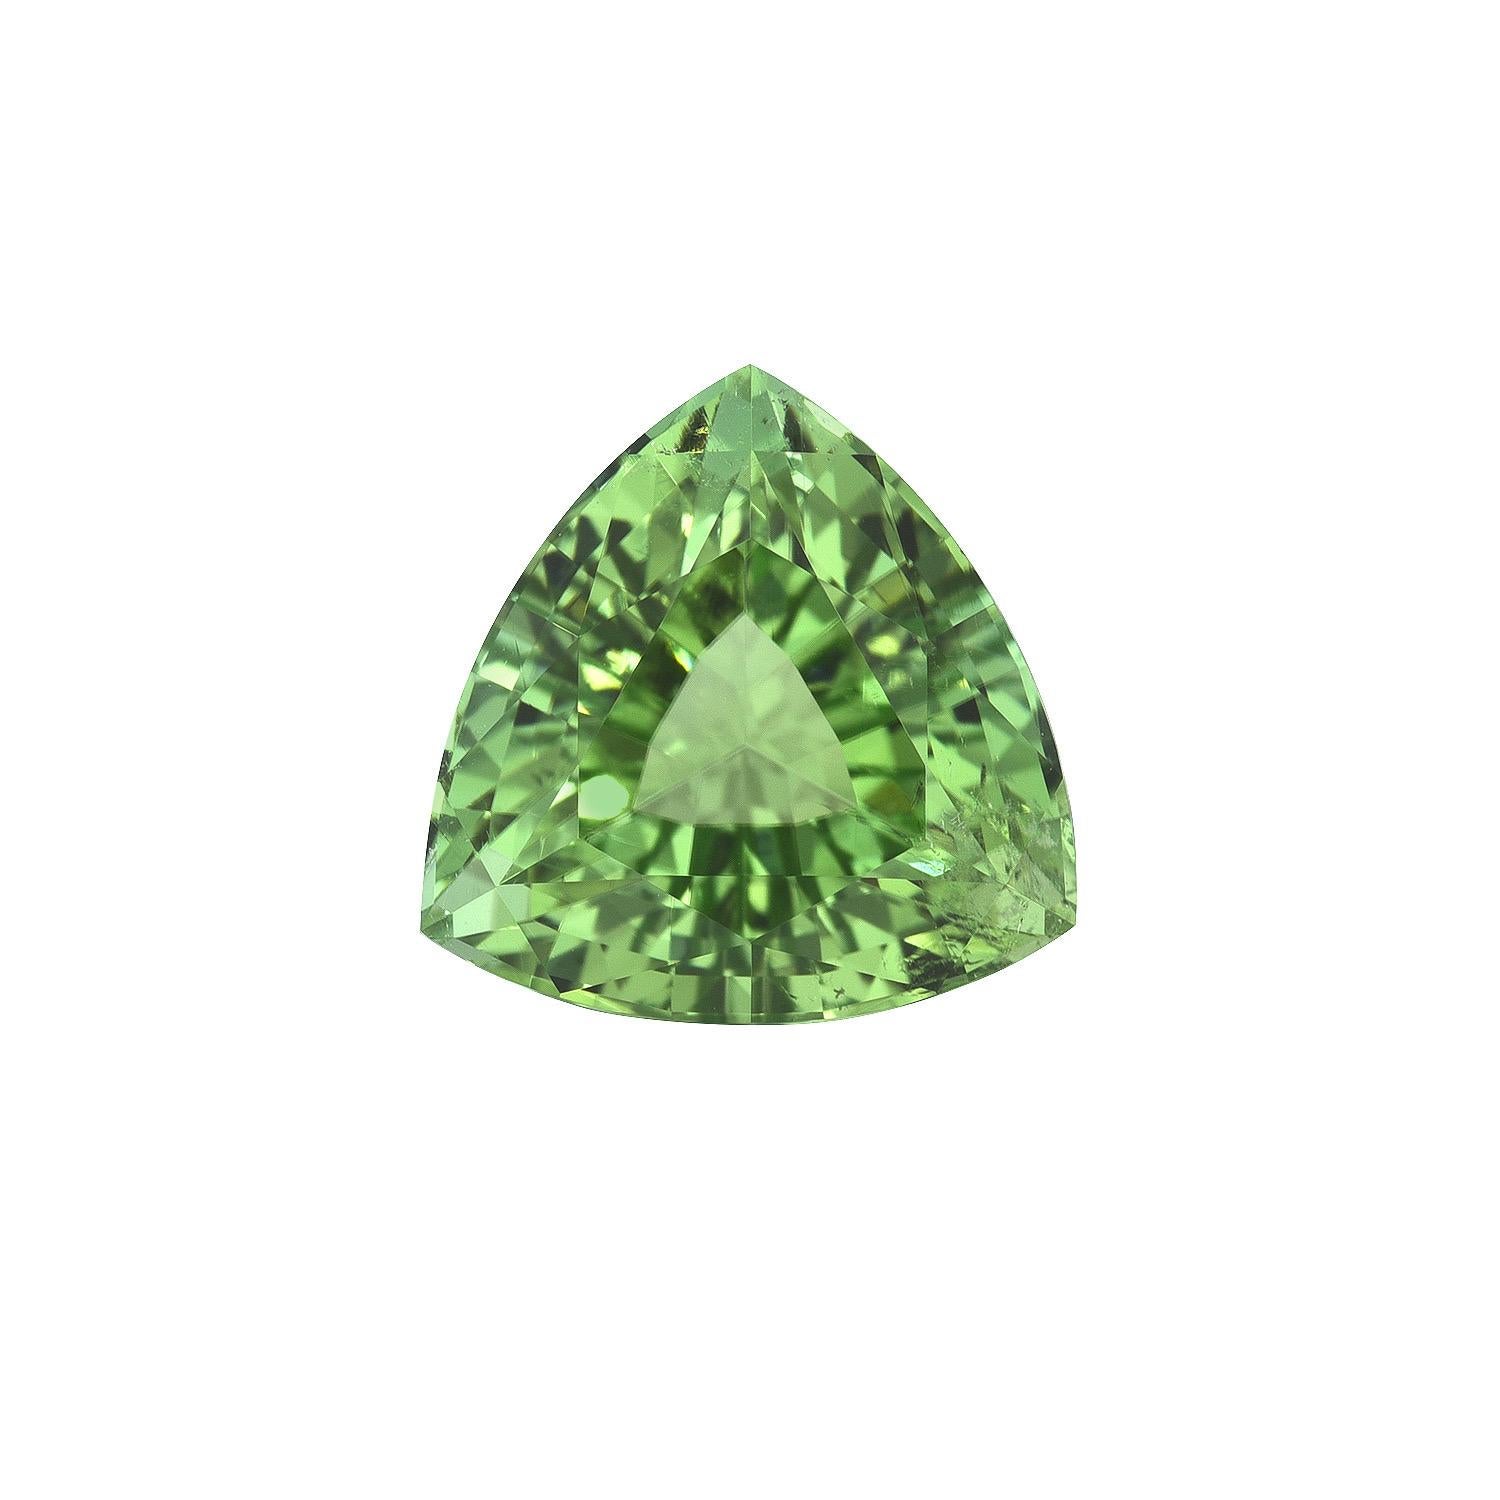 Unique 4.52 carat Mint Green Tourmaline Trillion loose gemstone, offered unmounted to someone special.
Dimensions: 10.8 x 10.8 x 6.9 mm.
Returns are accepted and paid by us within 7 days of delivery.
We offer supreme custom jewelry work upon